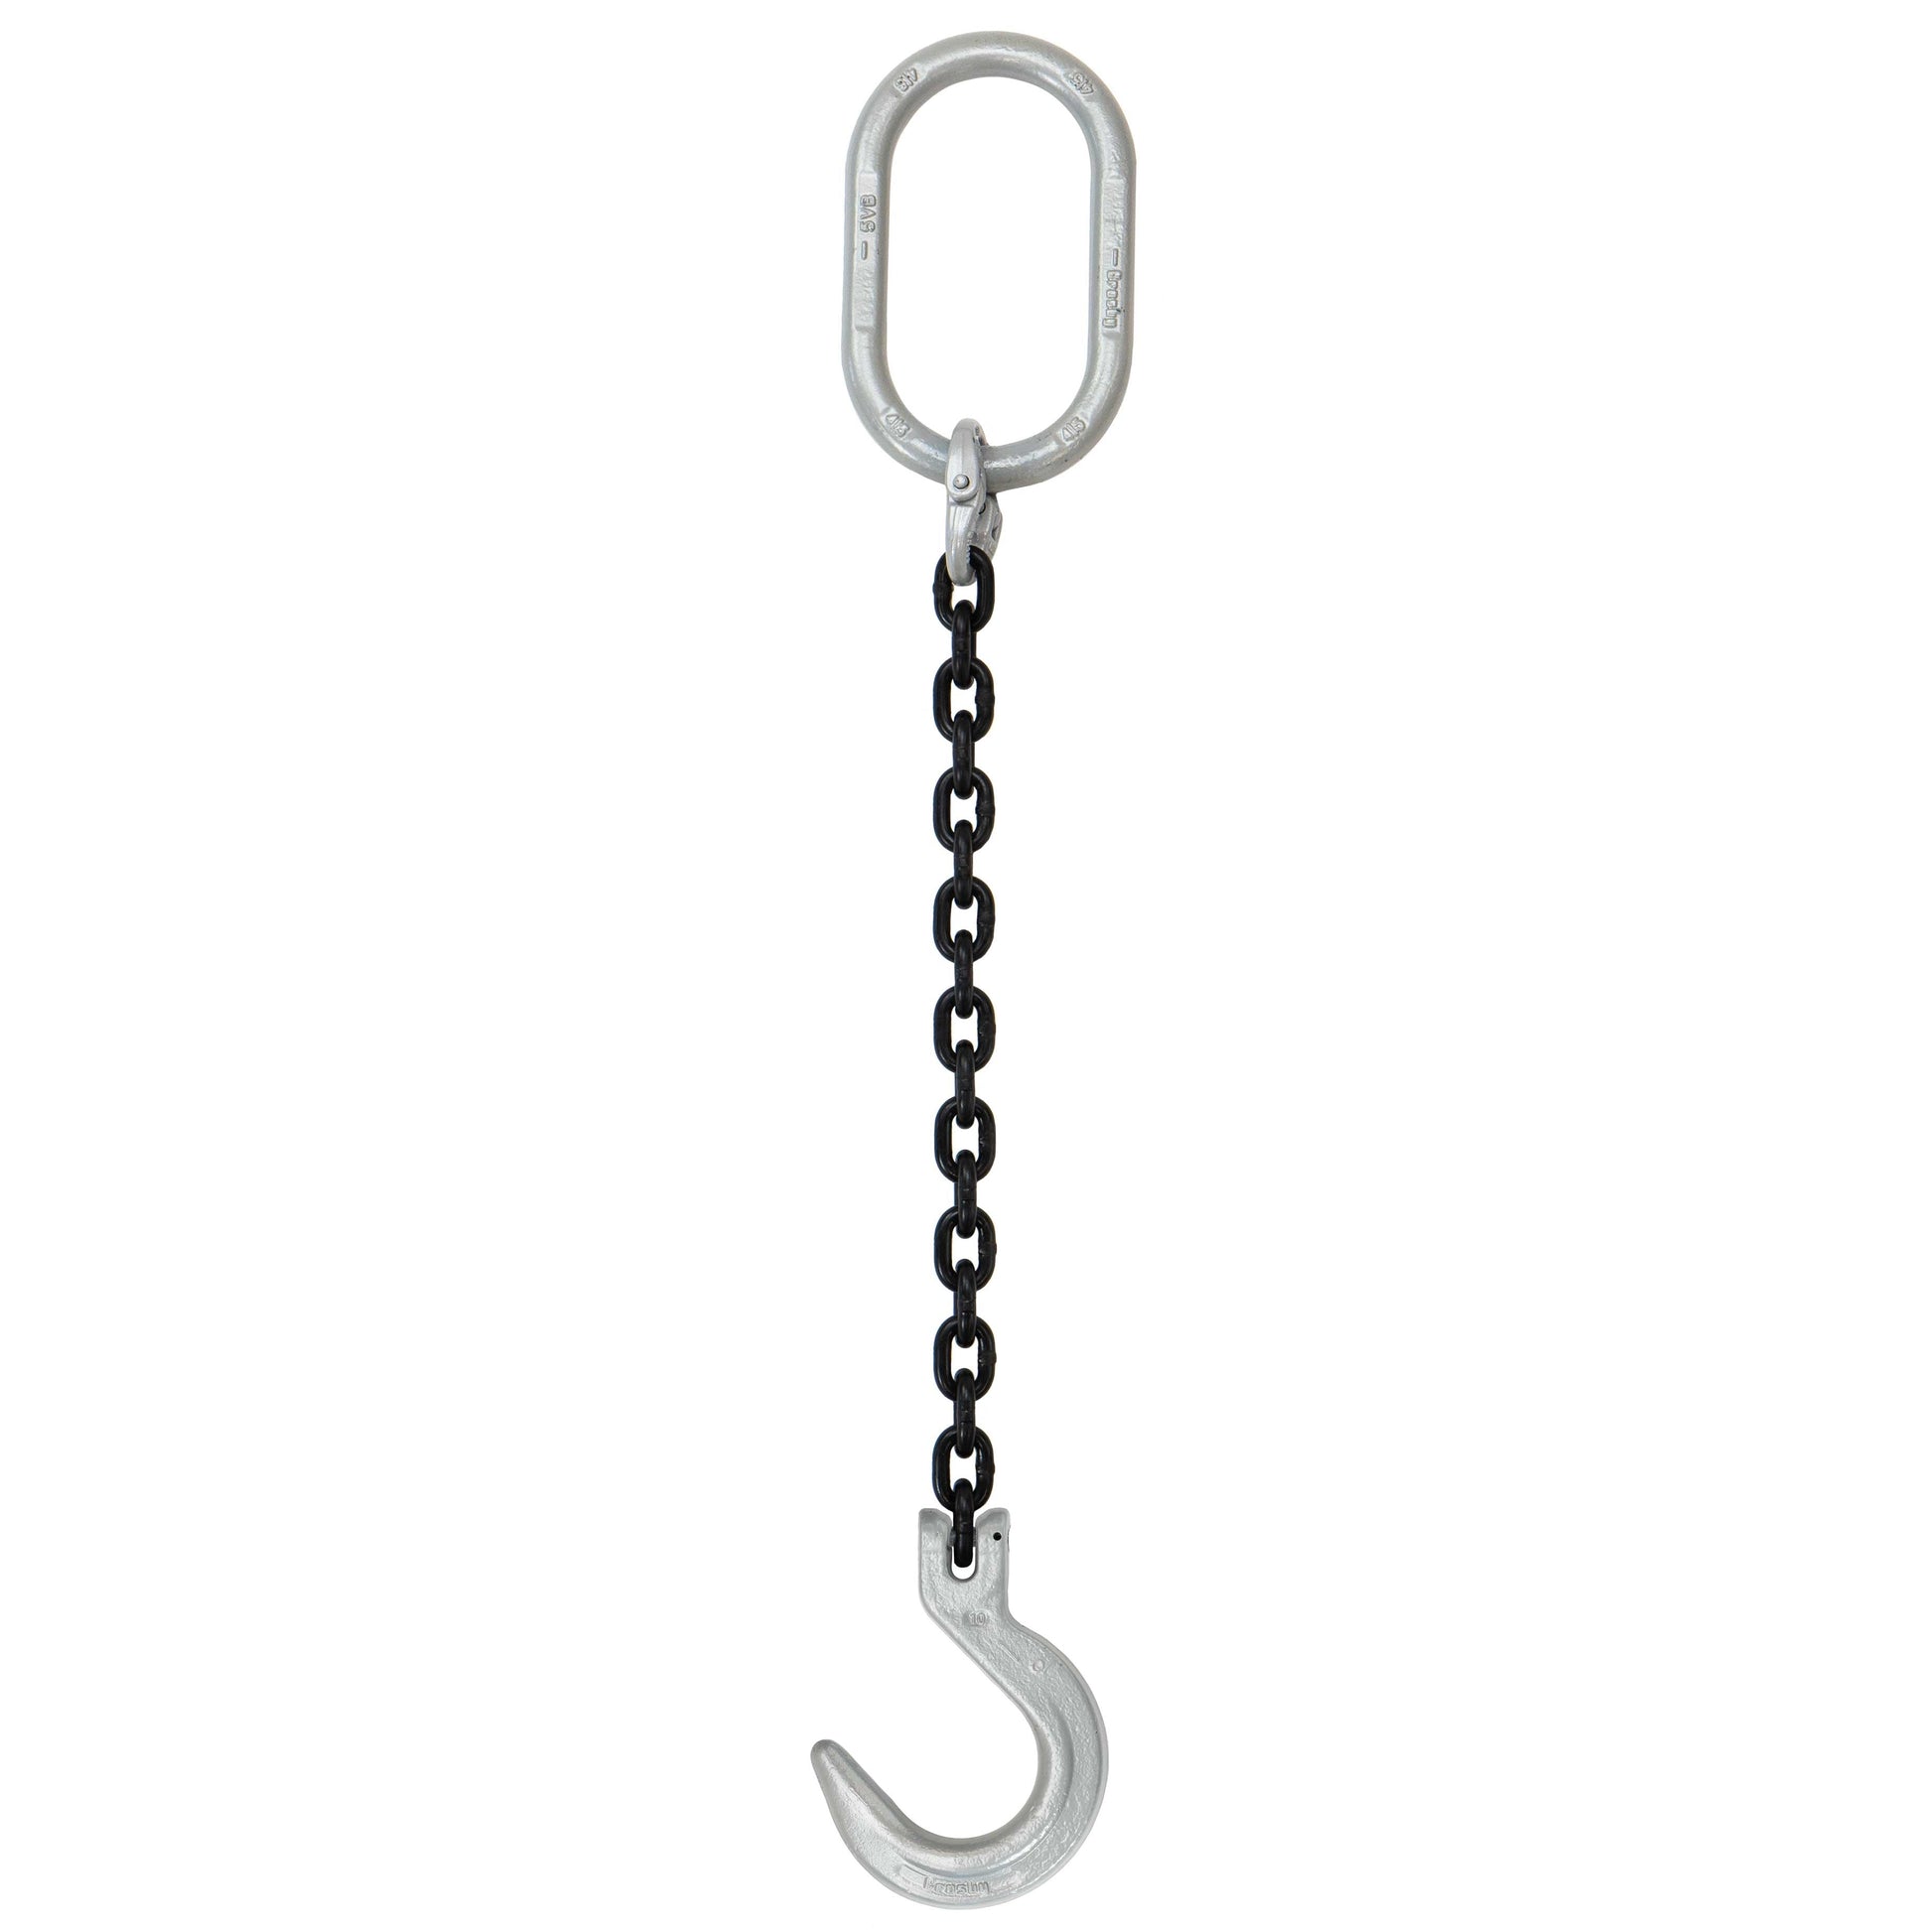 932 inch x 6 foot Domestic Single Leg Chain Sling w Crosby Foundry Hook Grade 100 image 1 of 2